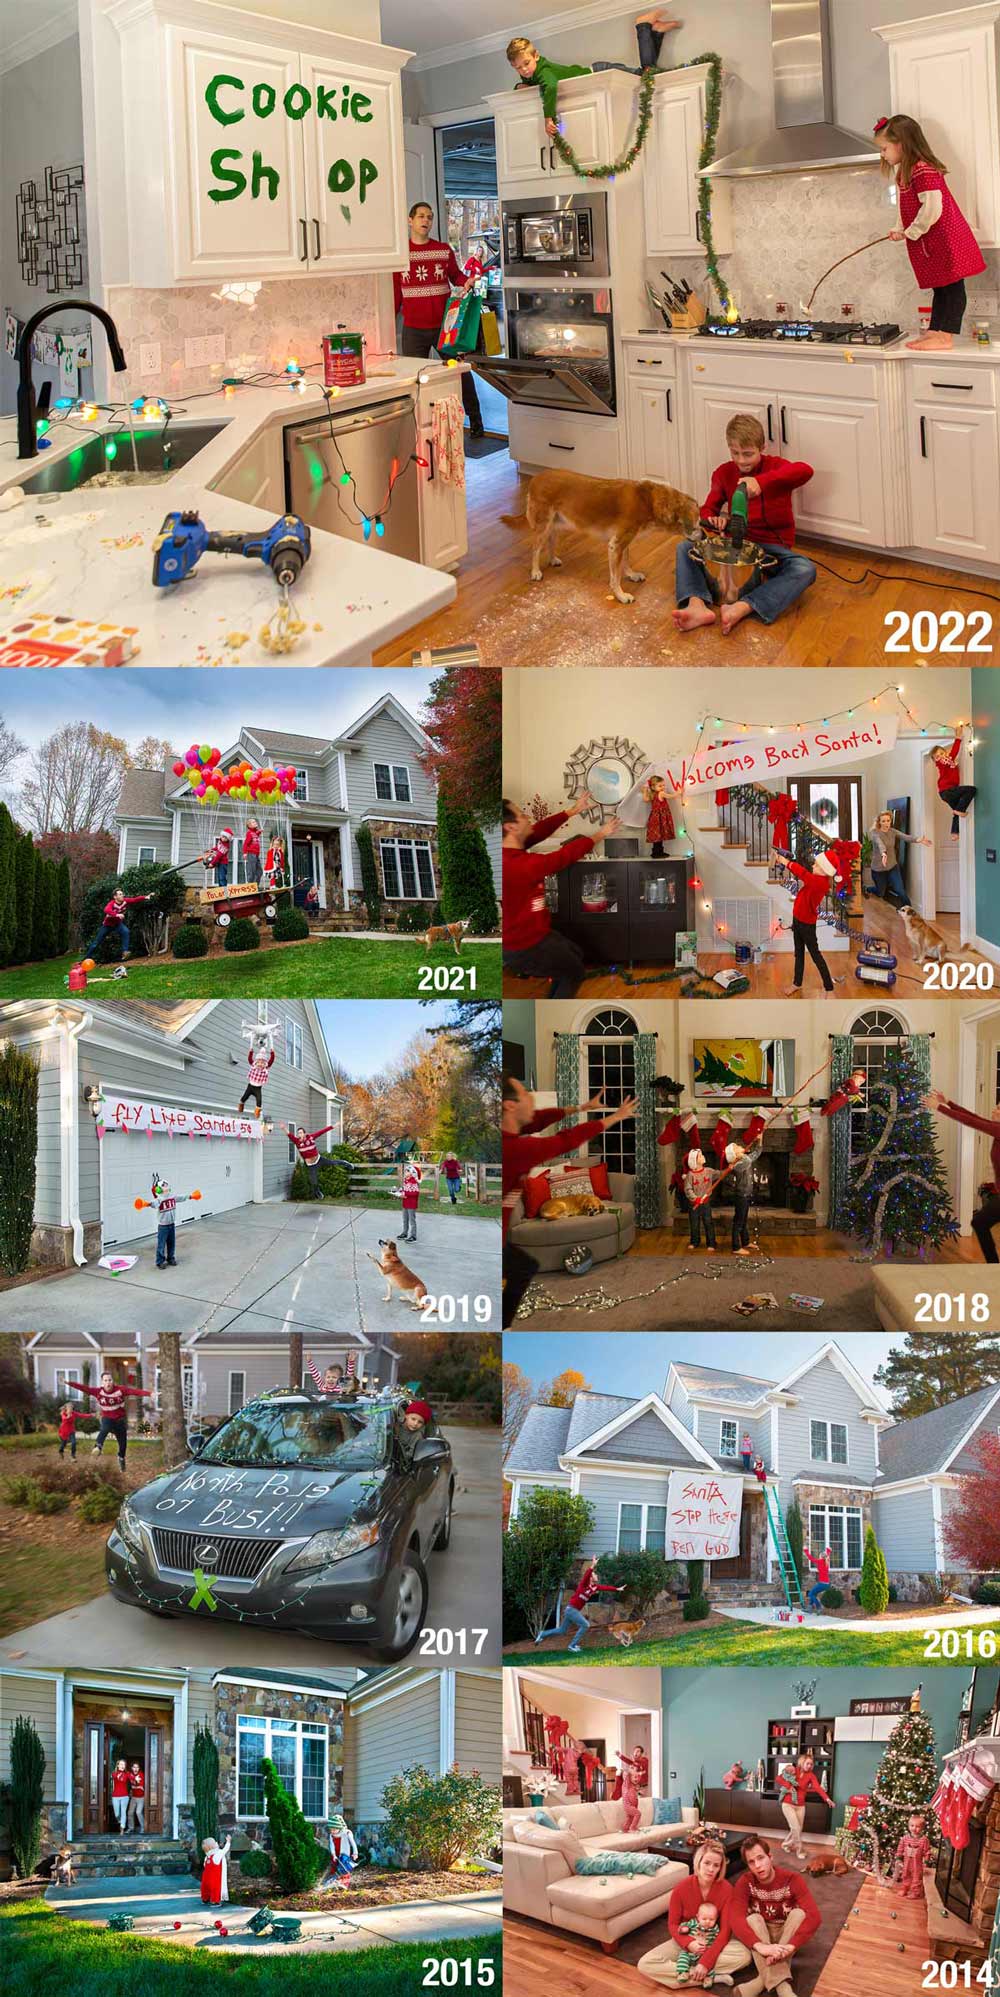 Our annual parenting chaos Christmas card - 9 years in a row...